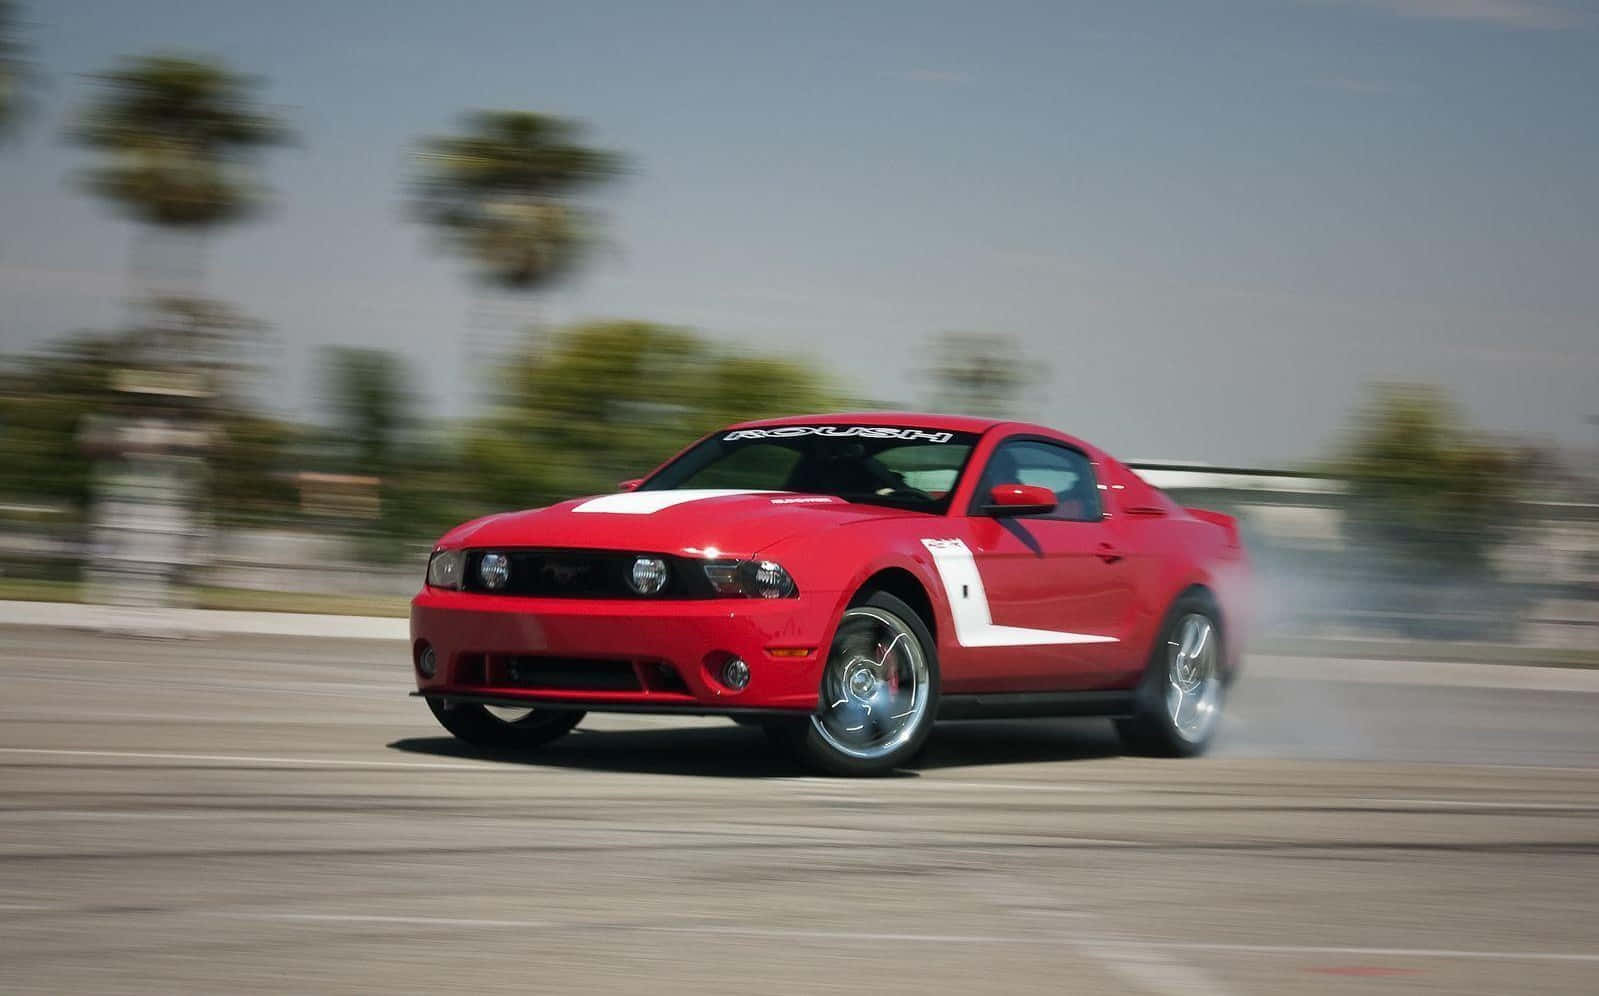 Stunning Ford Mustang Roush in Action Wallpaper